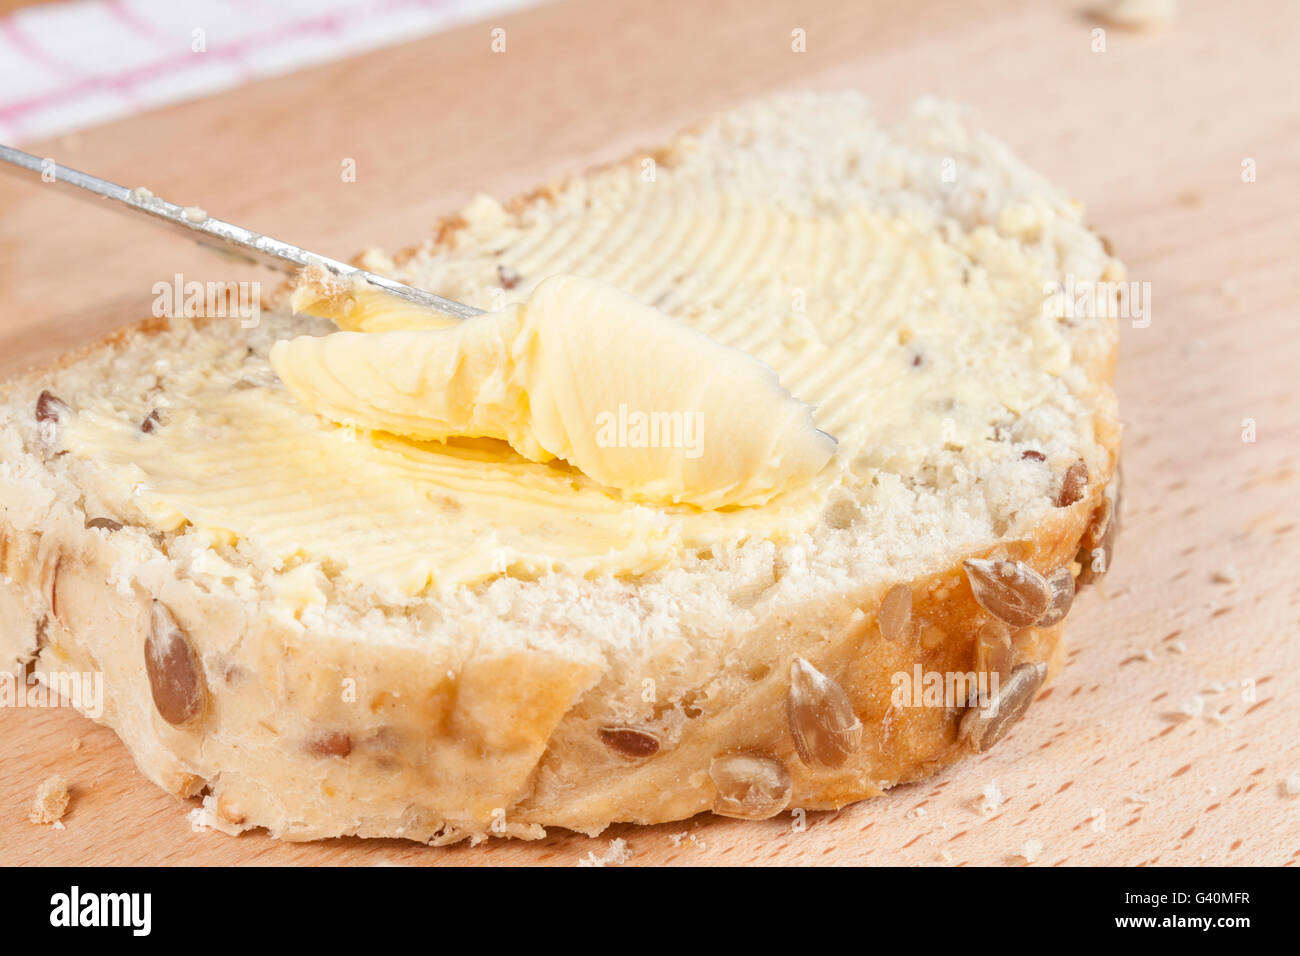 Slice of honey topped and sunflower seeded bread getting buttered on a wooden chopping board Stock Photo